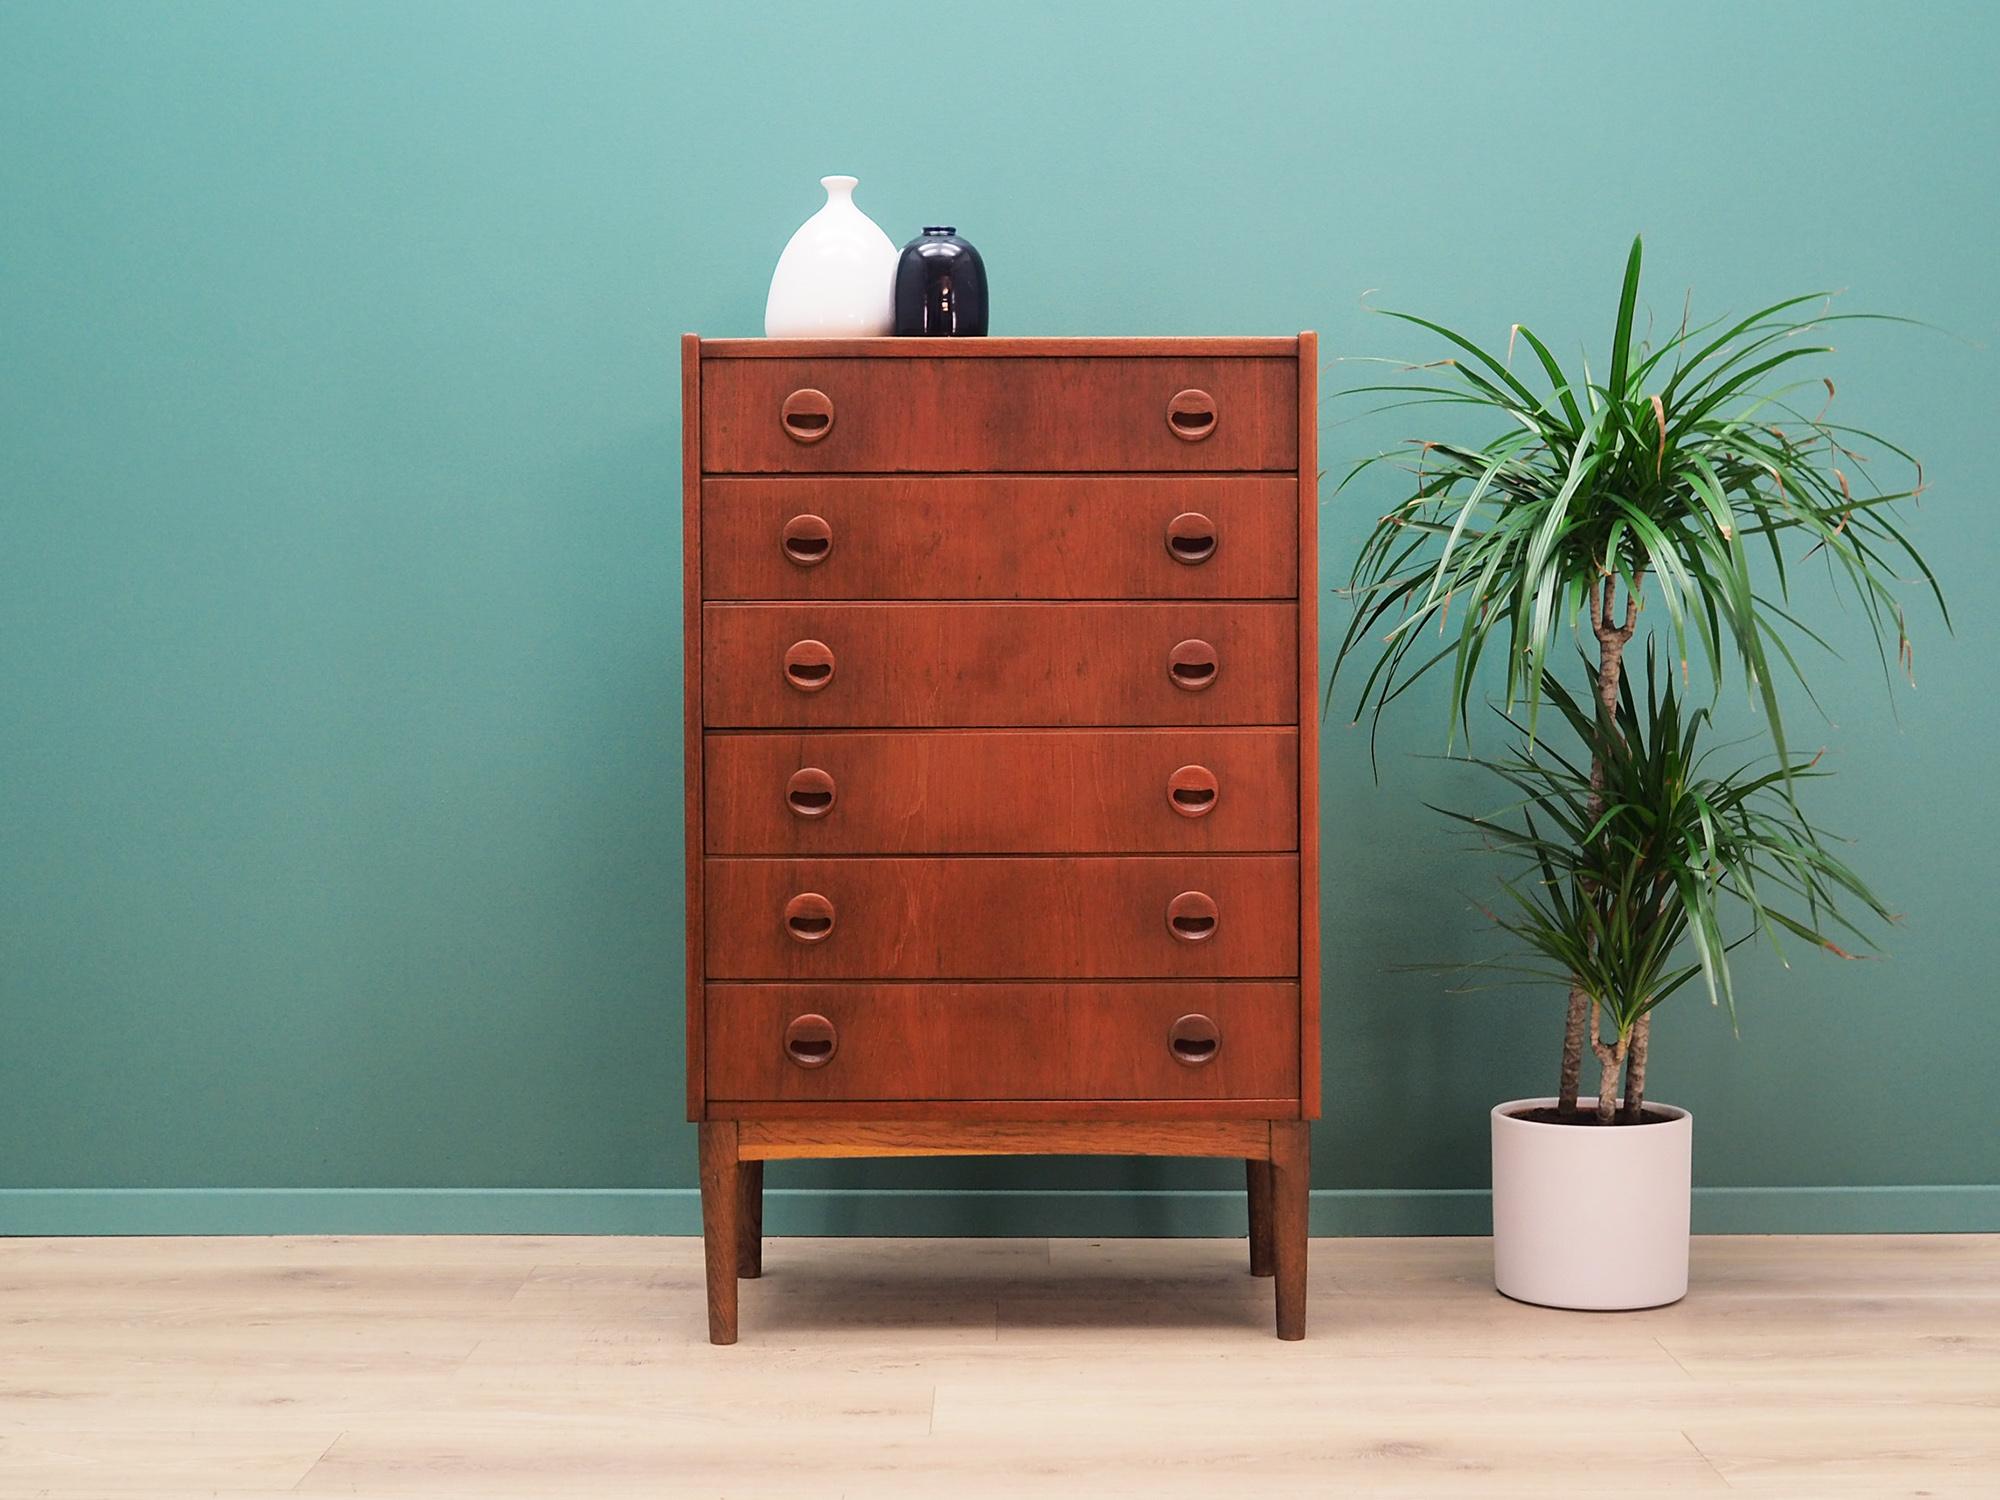 Exceptional chest of drawers from the 1960s-1970s, Minimalist form, Danish design. Surface of the furniture is covered with teak veneer, legs are made of solid teak wood. Furniture has six spacious drawers. Preserved in good condition (minor bruises